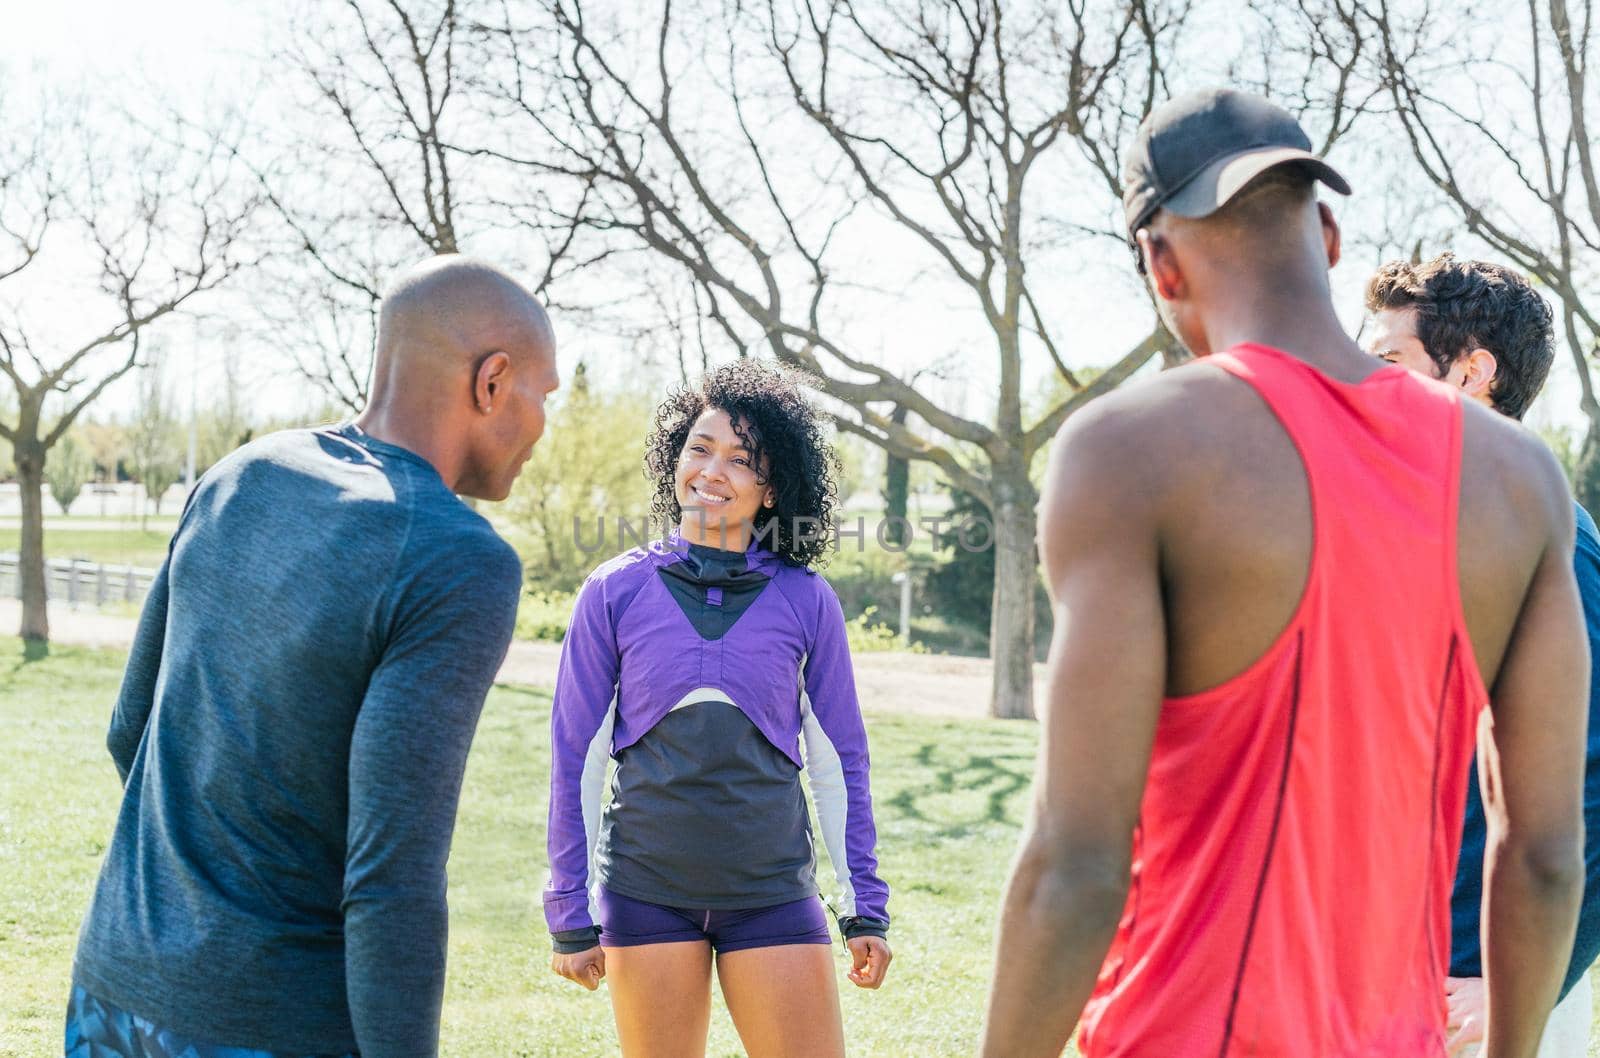 Group of friendly runners talking in a park before training. Selective focus.